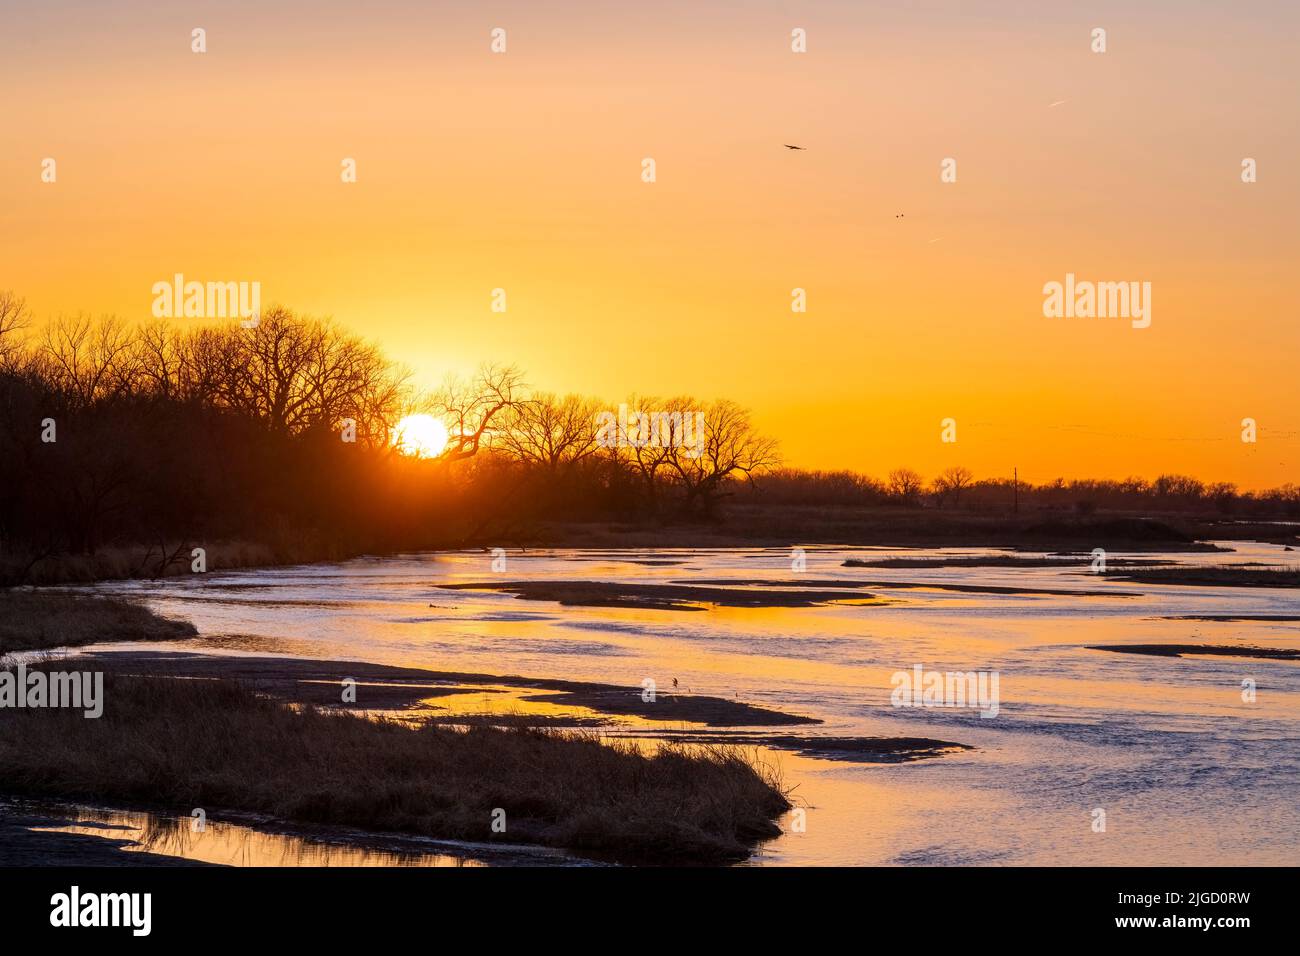 Sandhill cranes (Grus canadensis) ready to roost, Platte River, sunset, early Spring, Nebraska, USA, by Dominique Braud/Dembinsky Photo Assoc Stock Photo